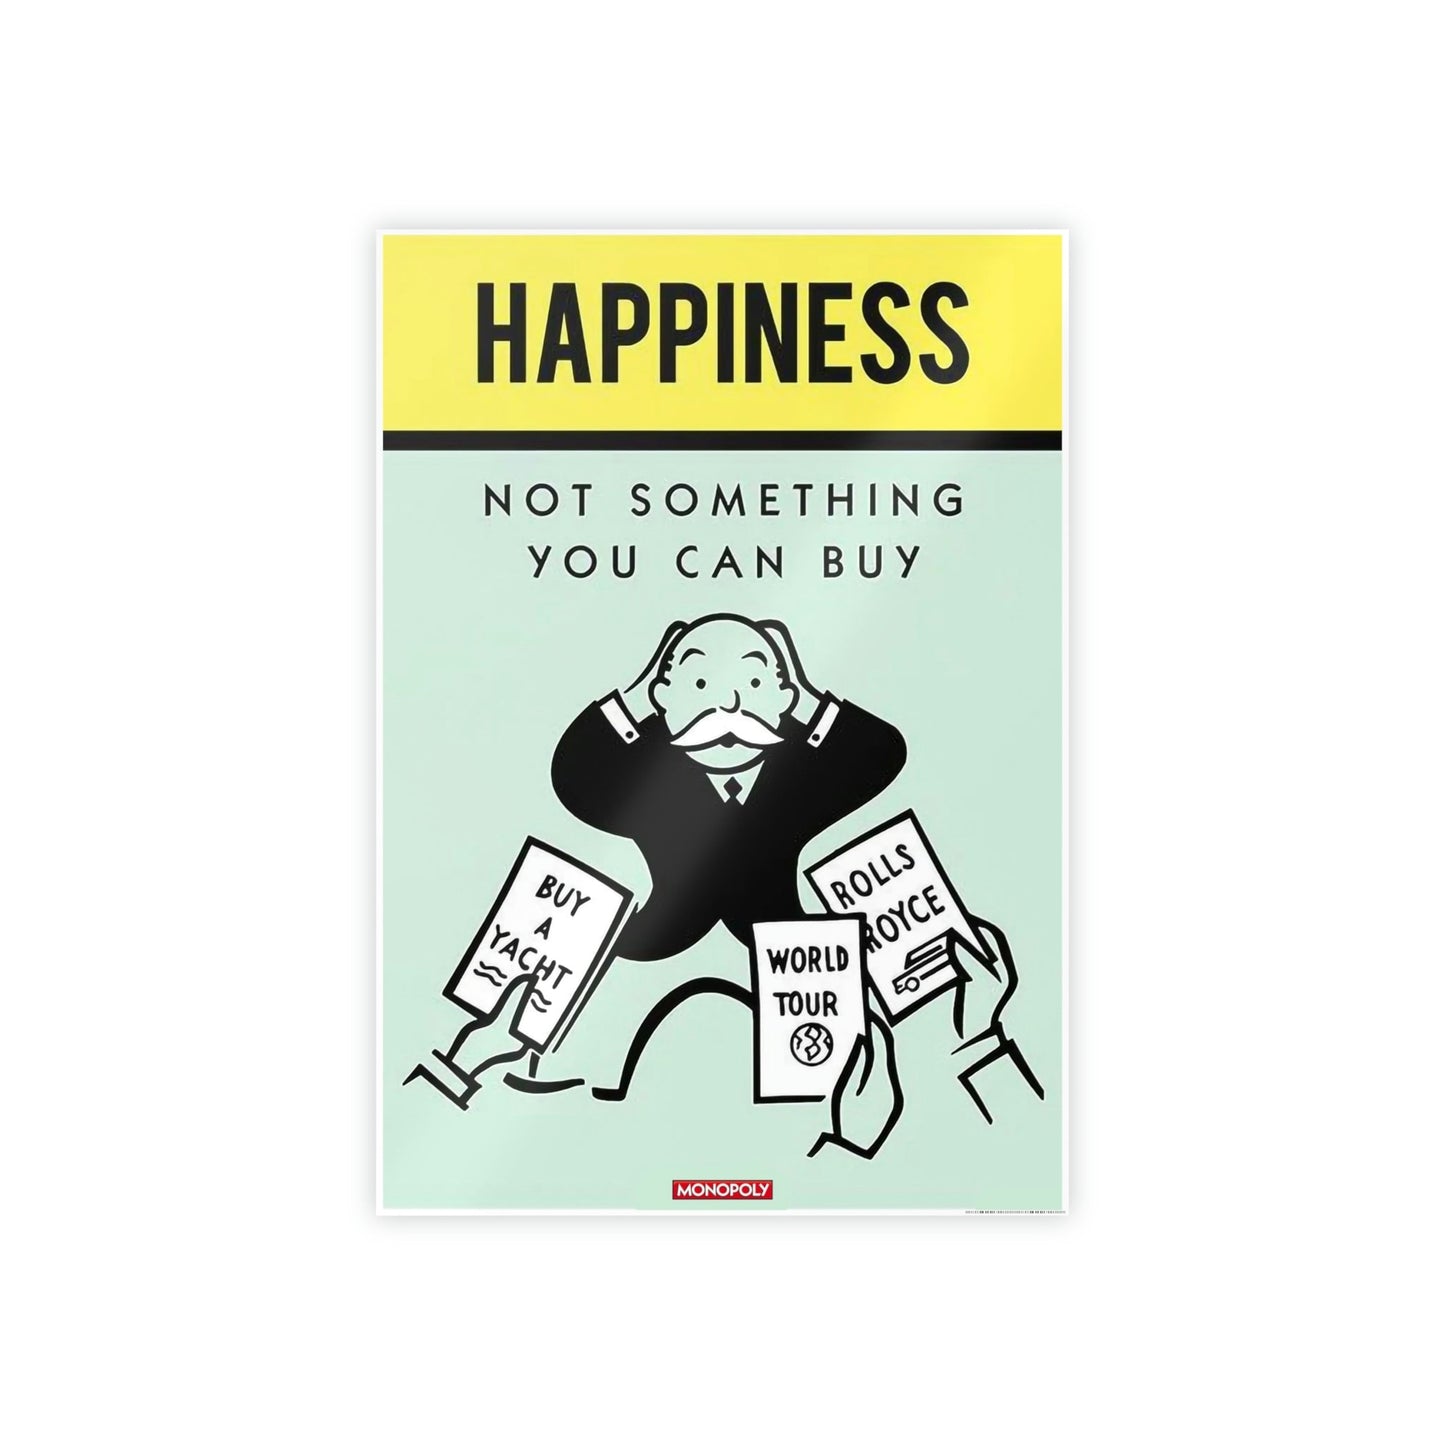 Money Quotes on Canvas: Alec Monopoly's Art and Poster Collection